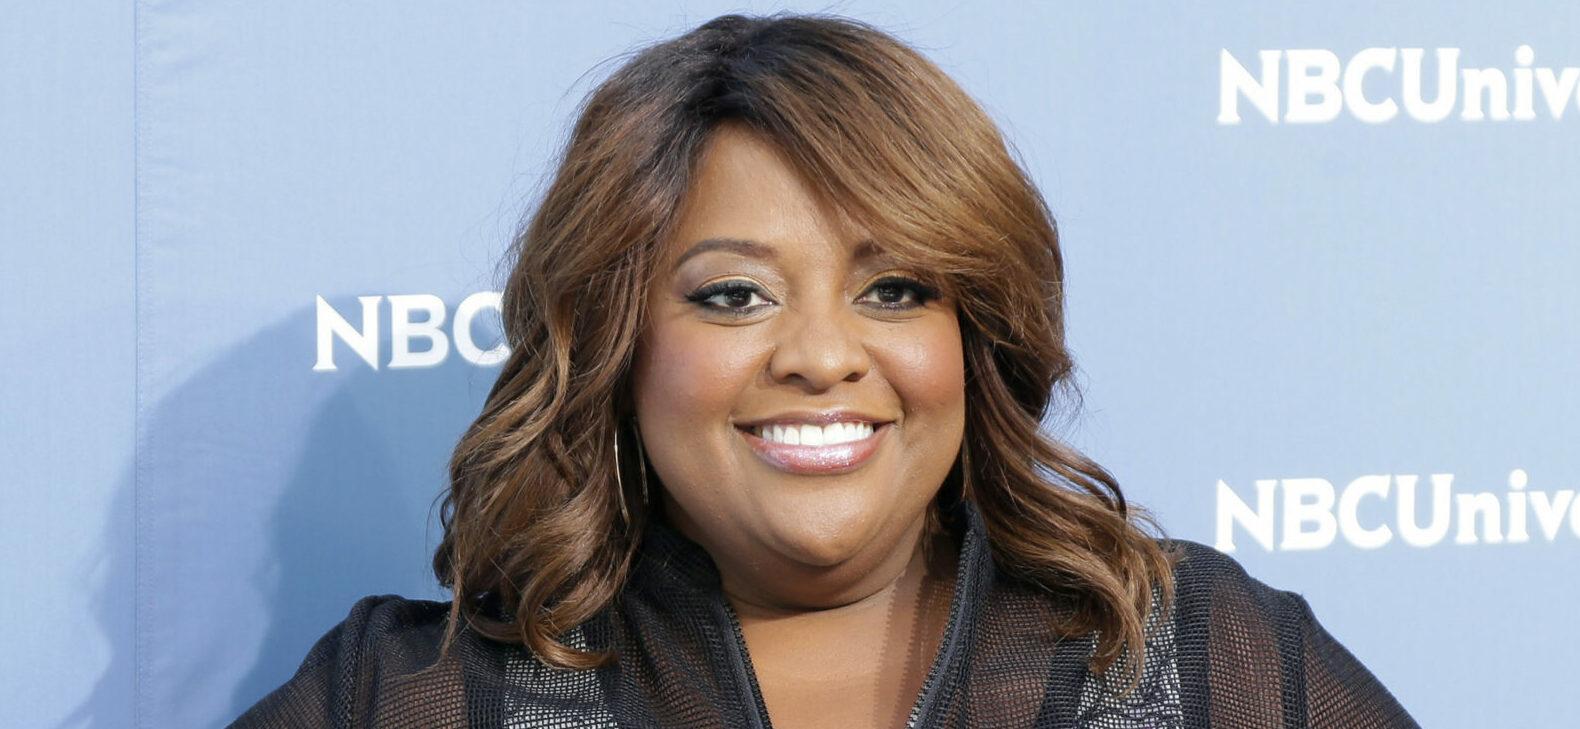 Sherri Shepherd Reveals Her Brief Jail Time Taught Her Life Lessons That Helped Her Succeed